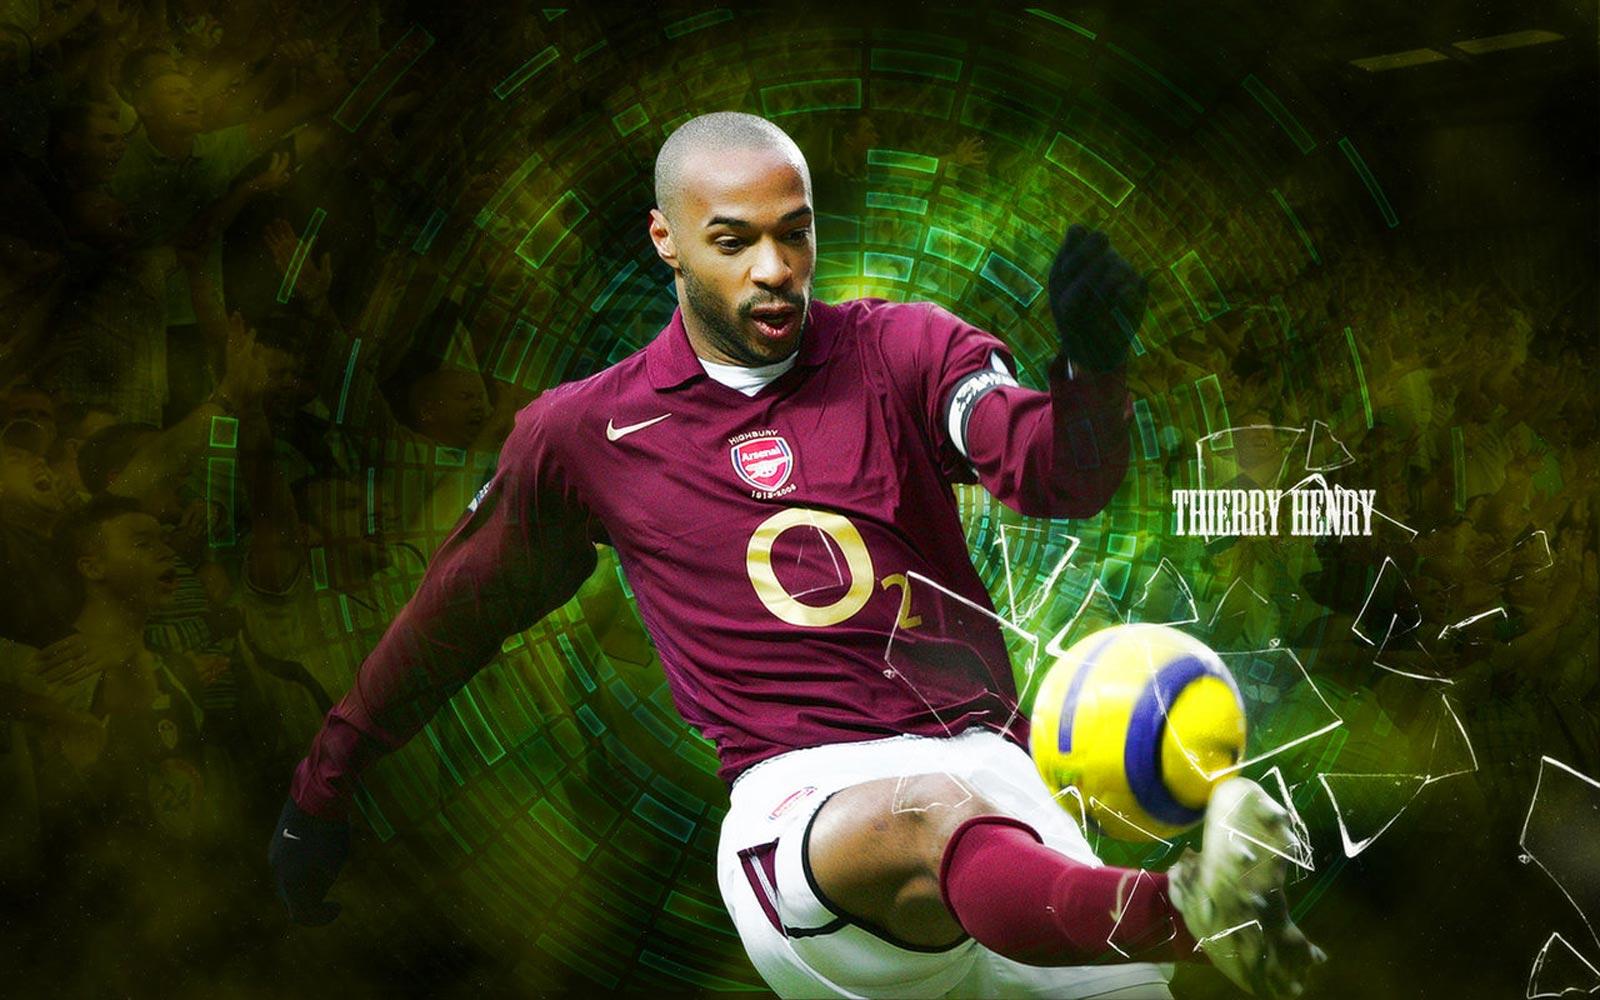 All Image Wallpaper: Thierry Henry Ptofile And Picture Image 2012